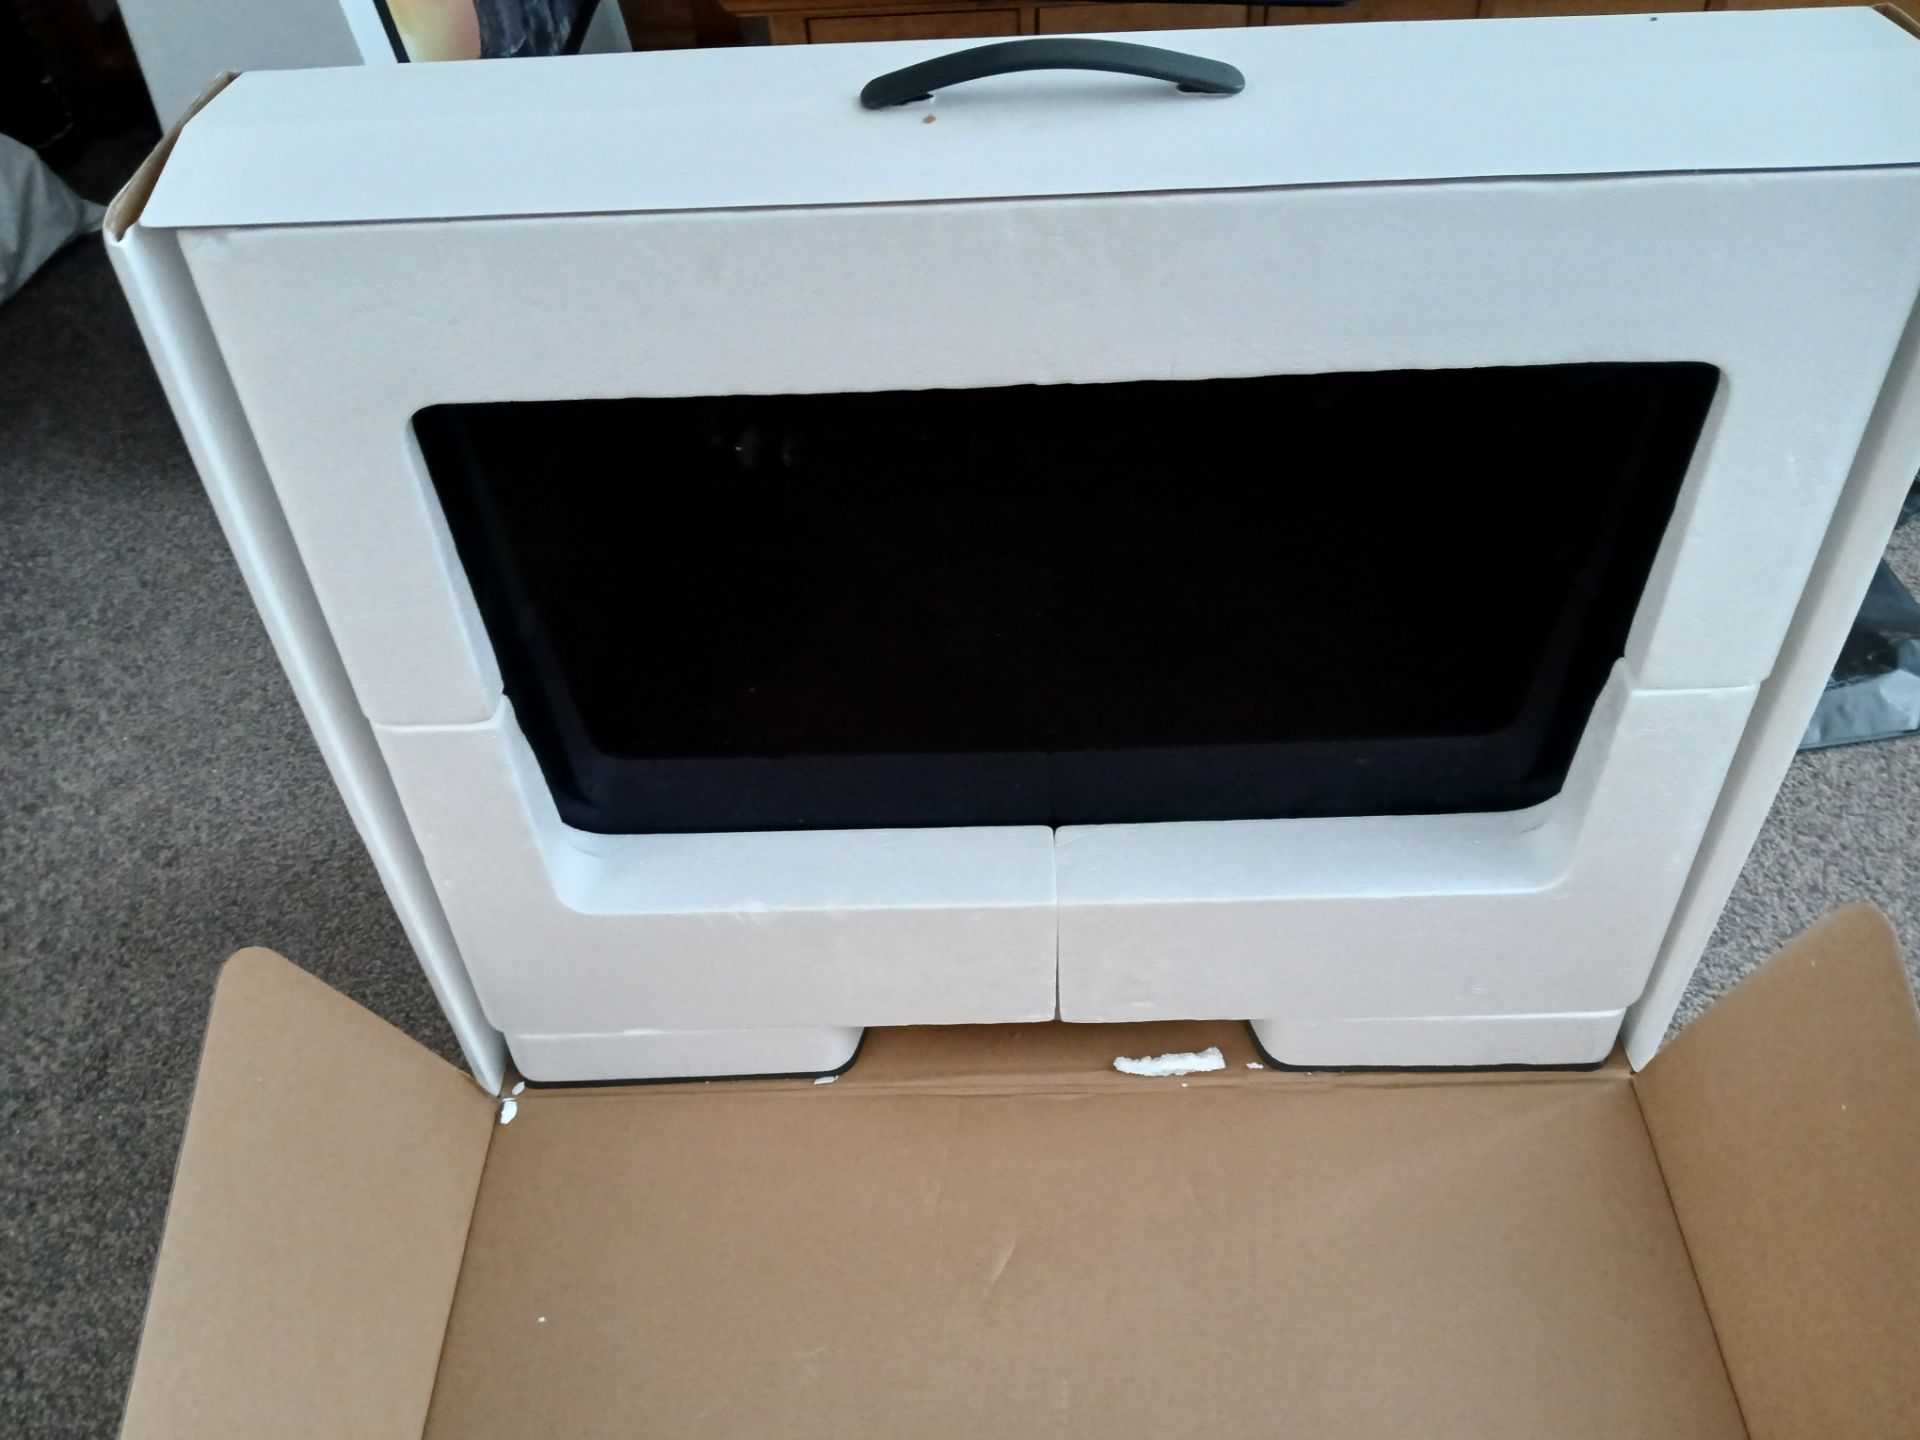 Apple iMac (Retina 5K, 27”, Mid 2015), Serial Number DGKQ306WFY13, with keyboard (No Mouse or - Image 10 of 14